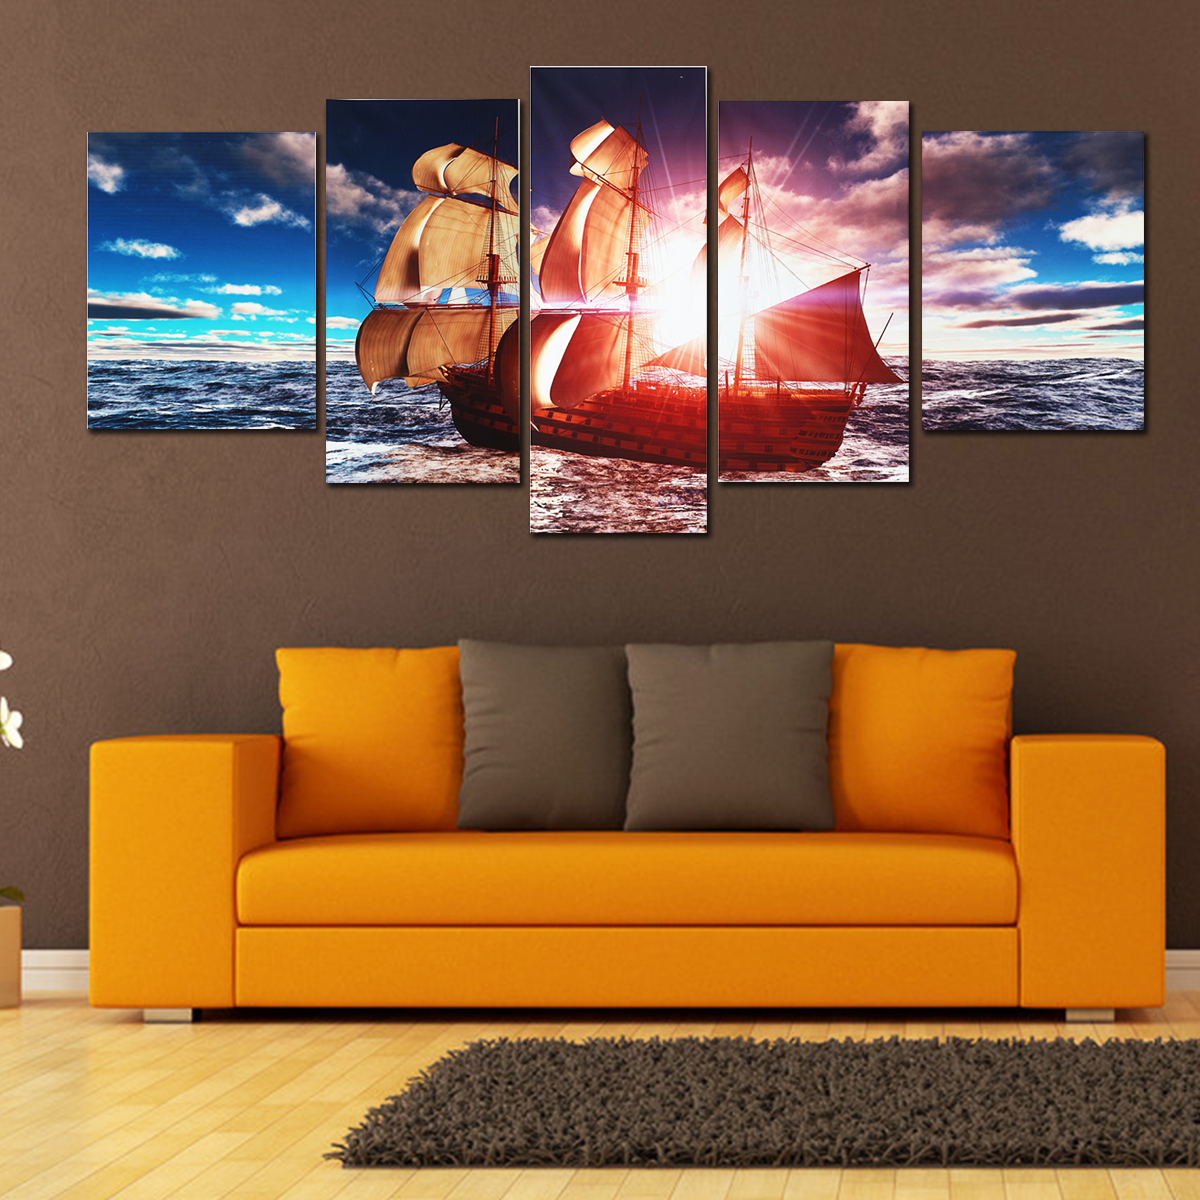 

5PCS Uframed Sunset Modern Art Canvas Oil Paintings Pictures Print Home Wall Decor